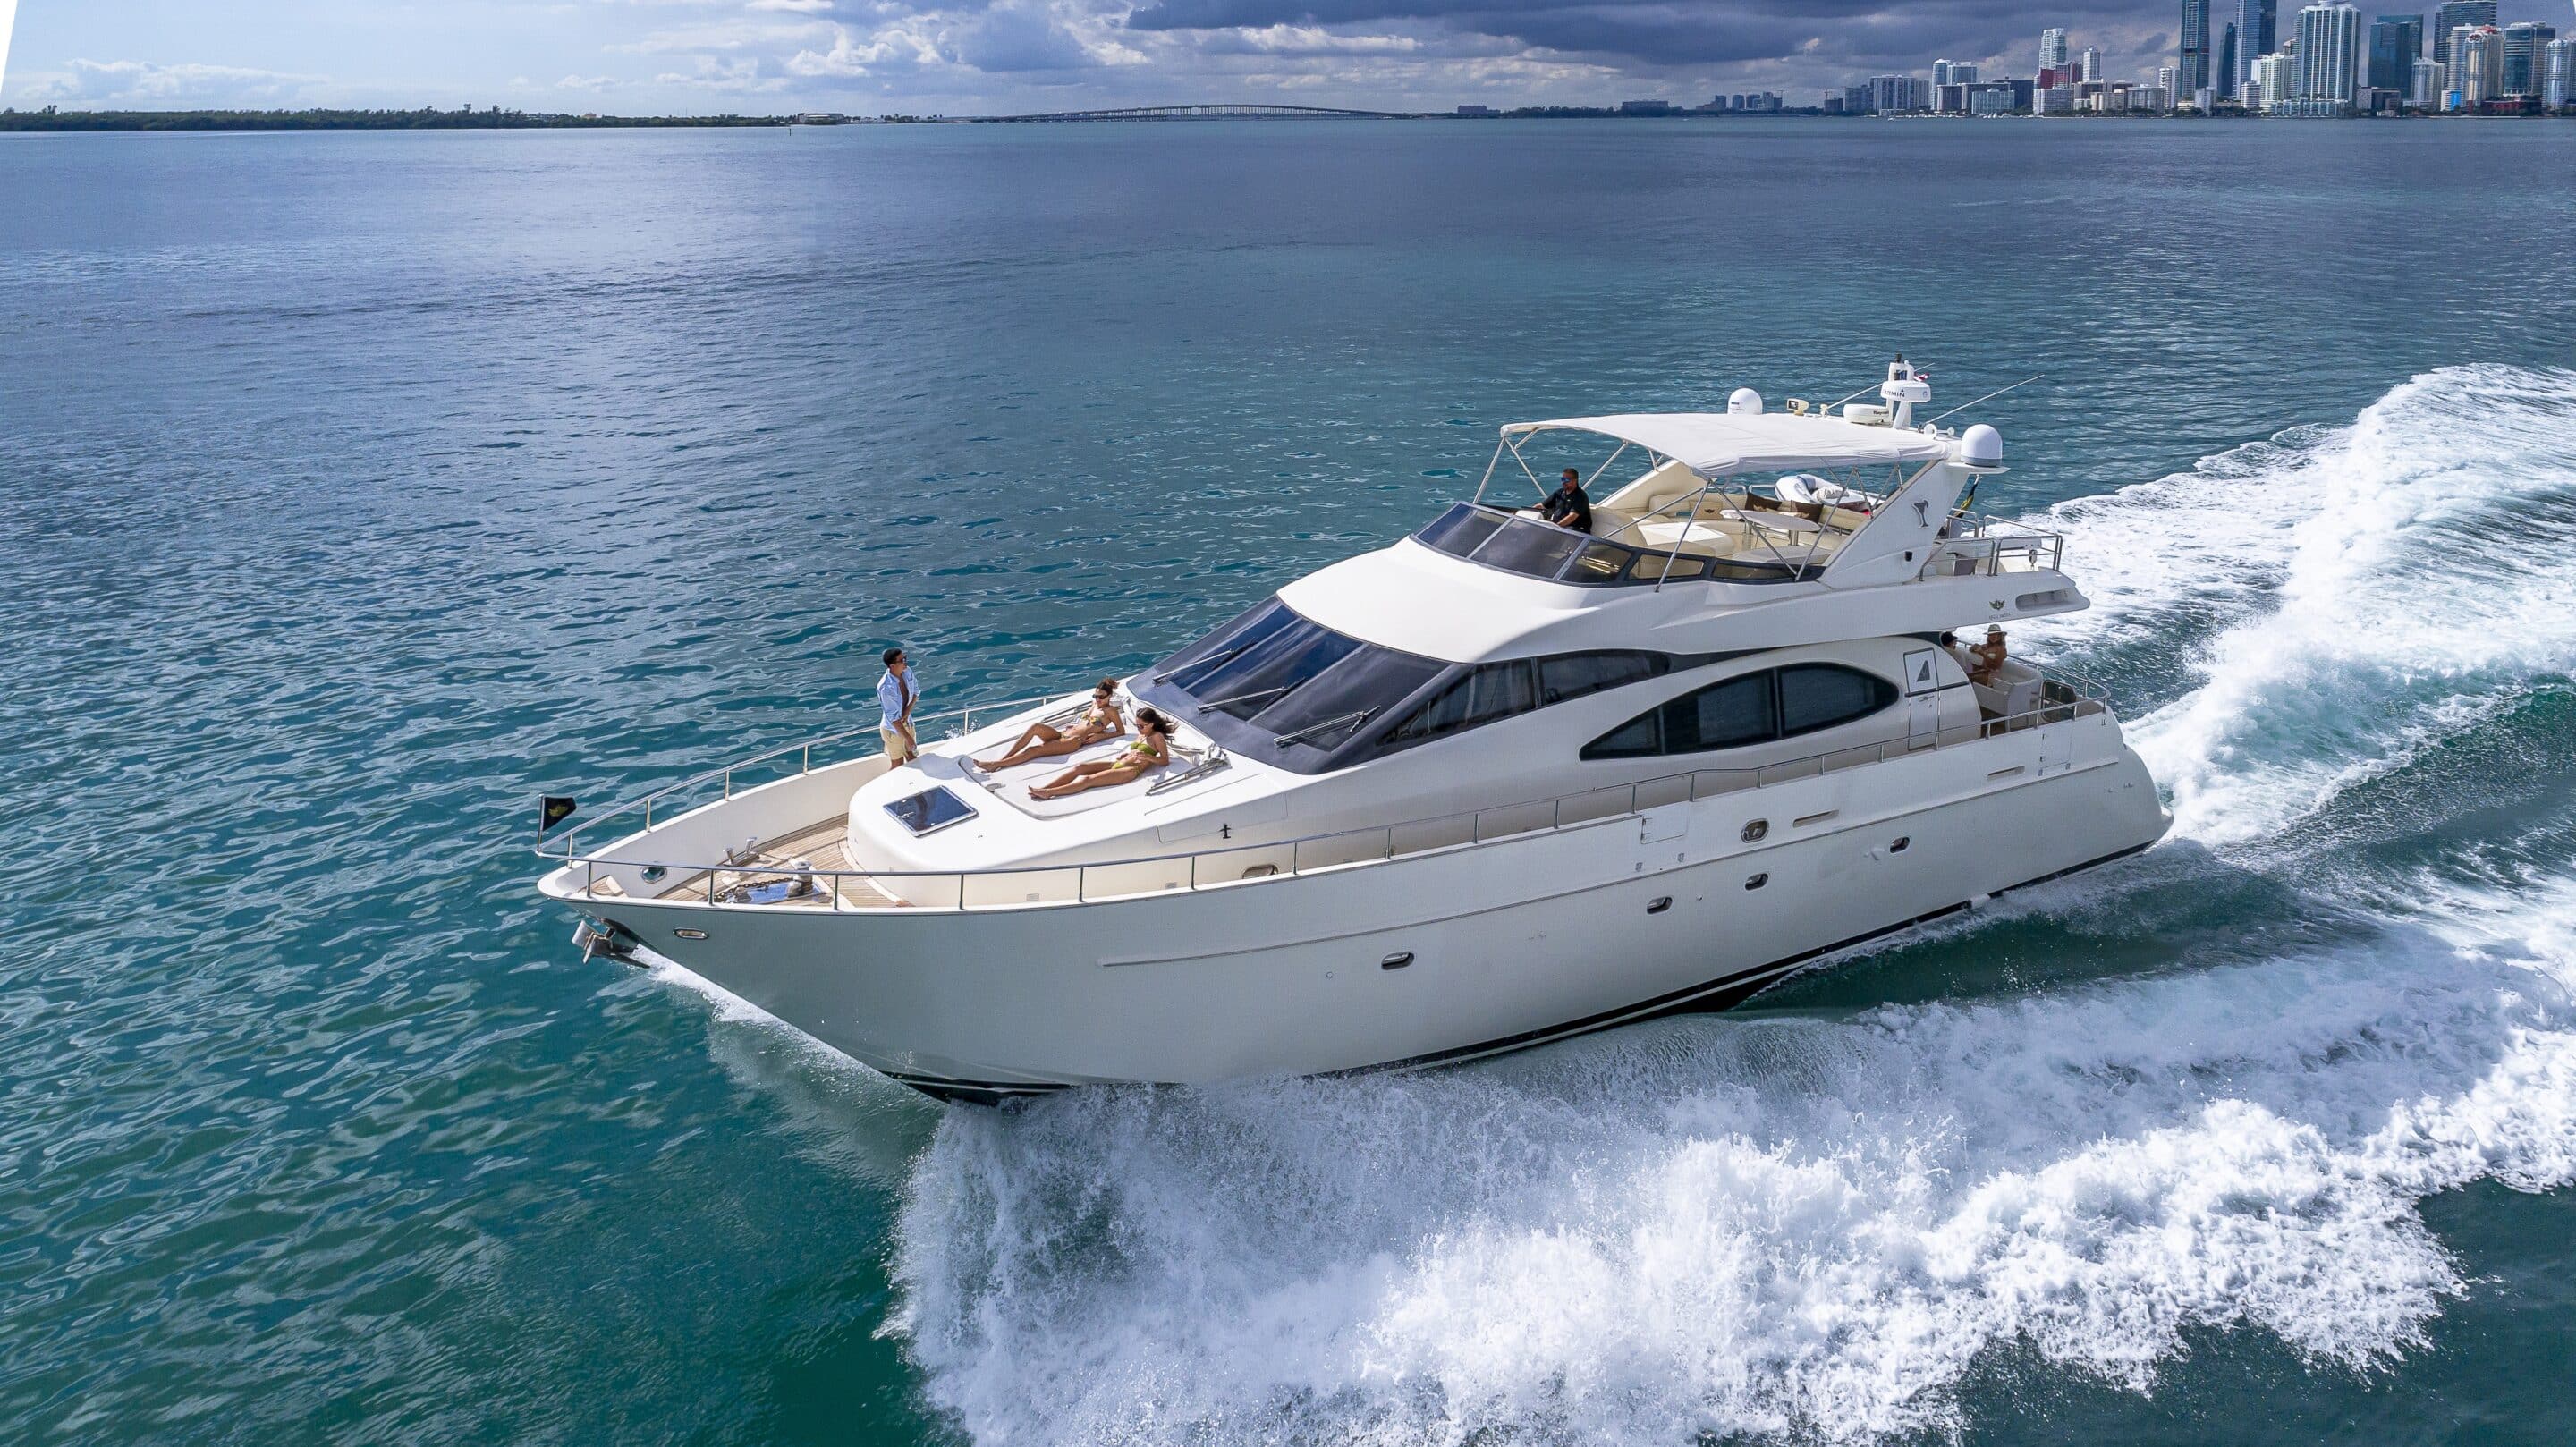 Image of 78 foot azimut yacht in the water